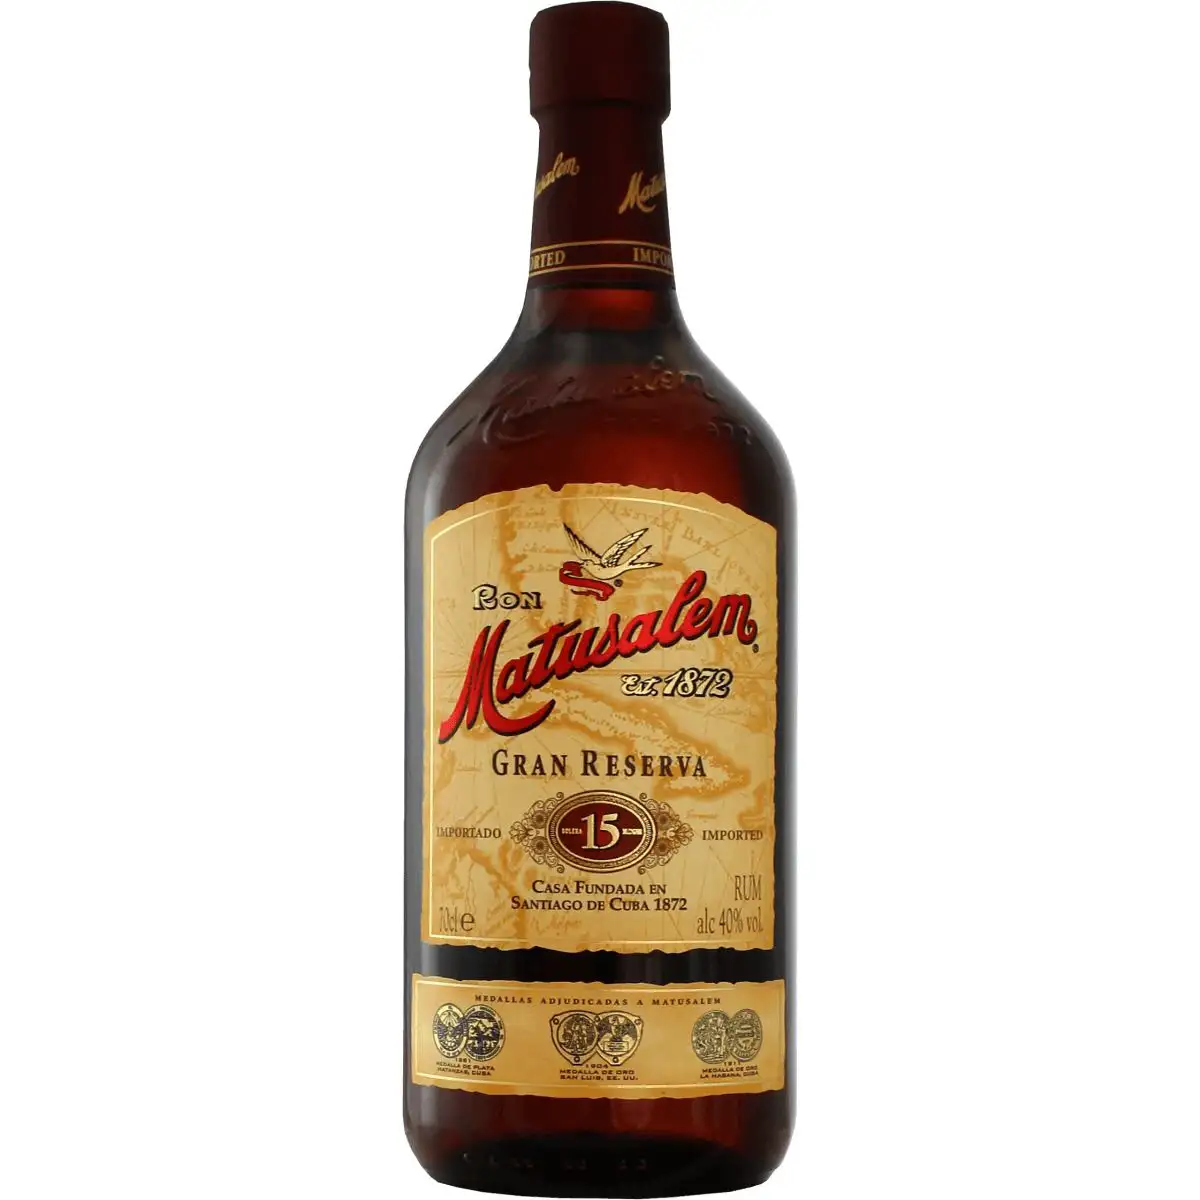 Image of the front of the bottle of the rum Gran Reserva 15 Años